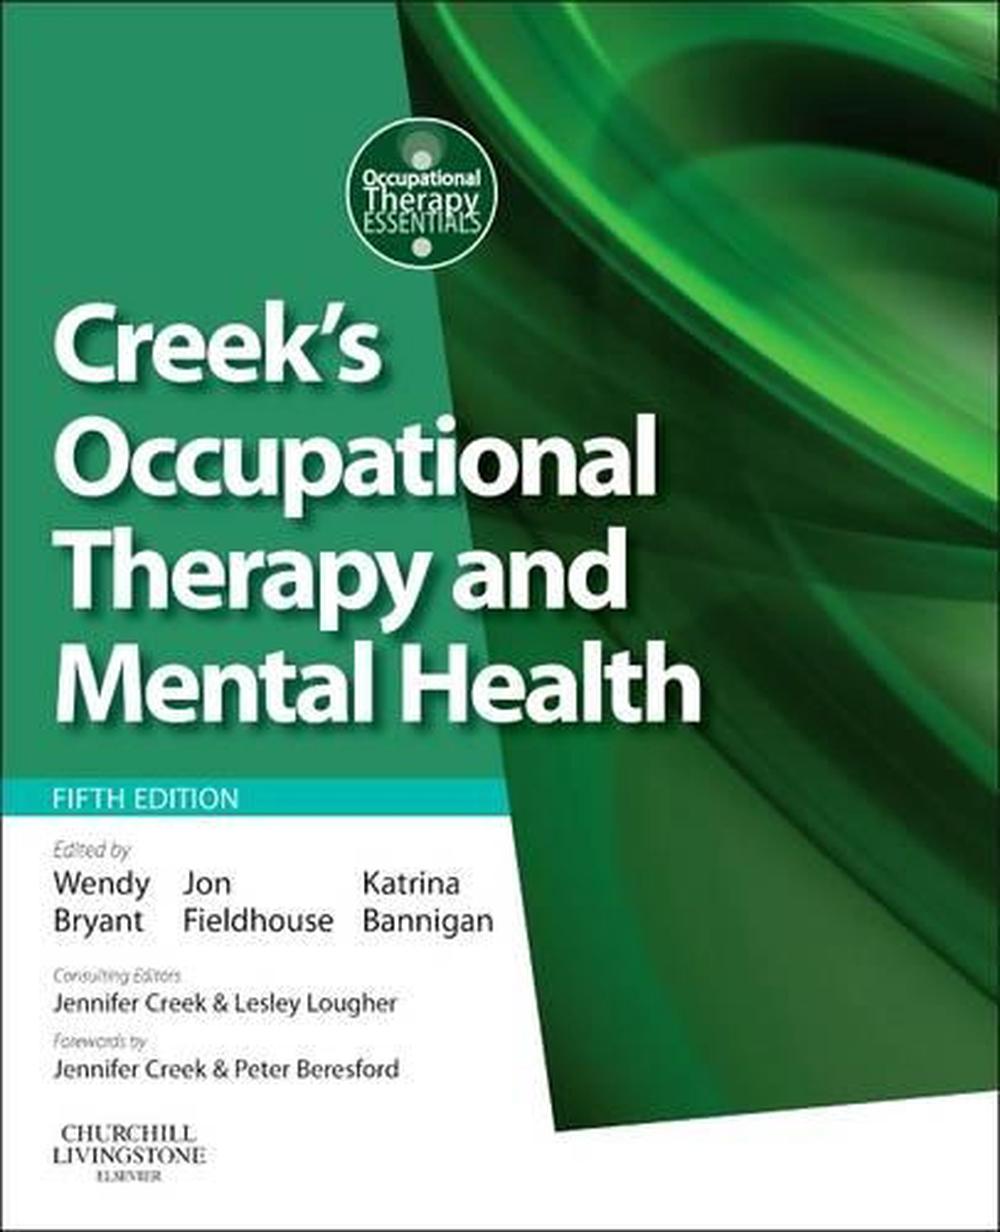 Creeks Occupational Therapy And Mental Health 5th Edition By Katrina